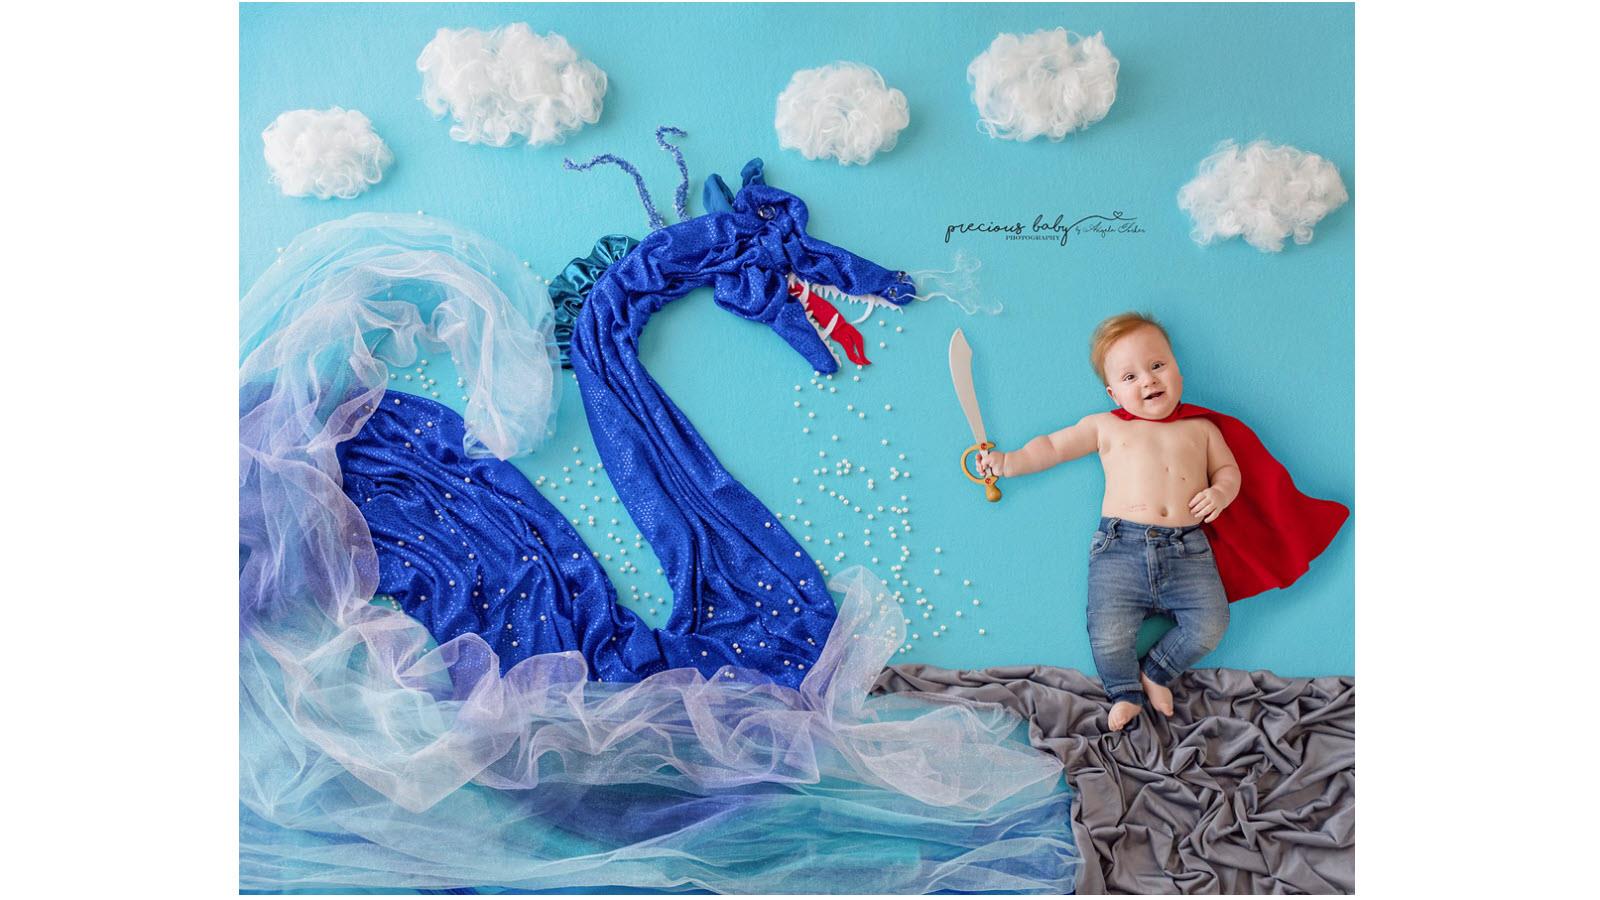 Baby wearing a cape and holding a sword alongside a blue dragon